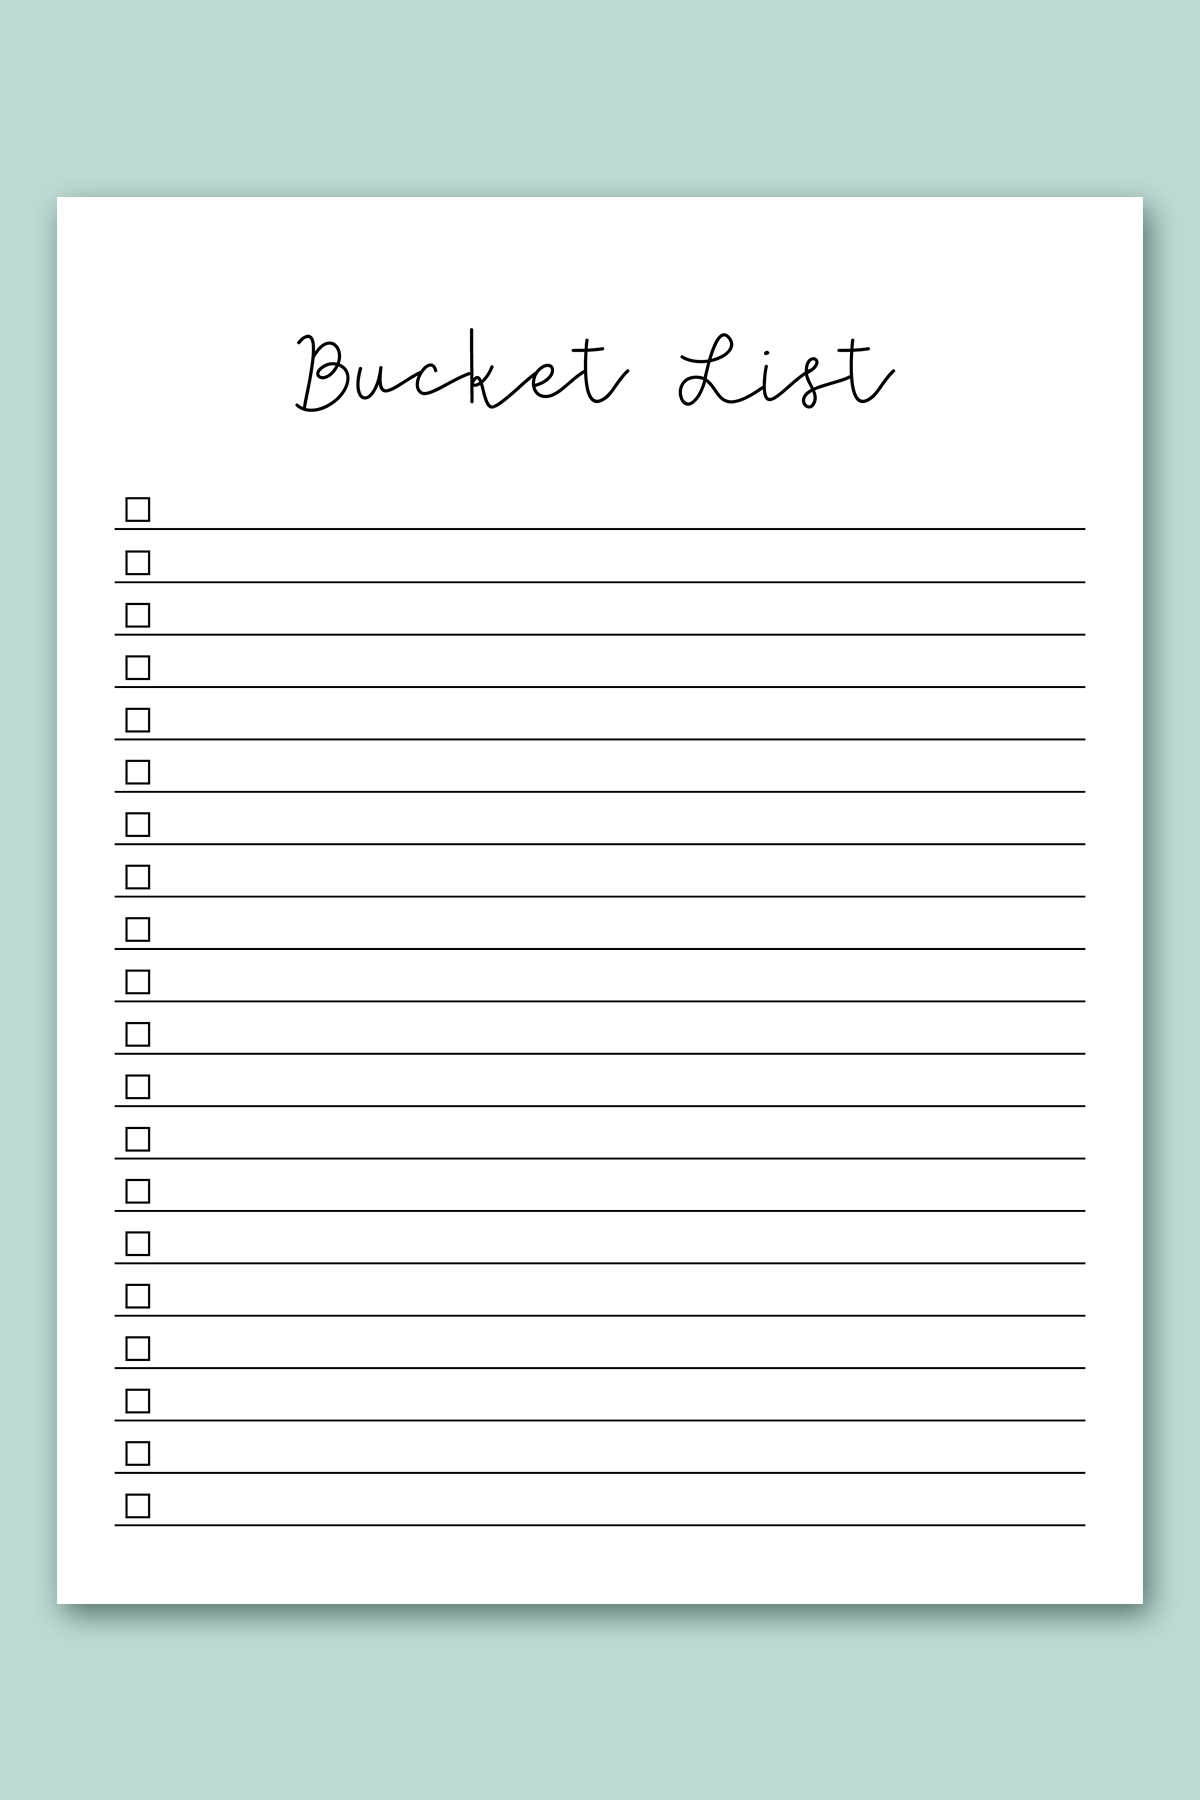 This image shows one of lists from the free bucket list printable set. This one is the generic bucket list printable with a simple design.